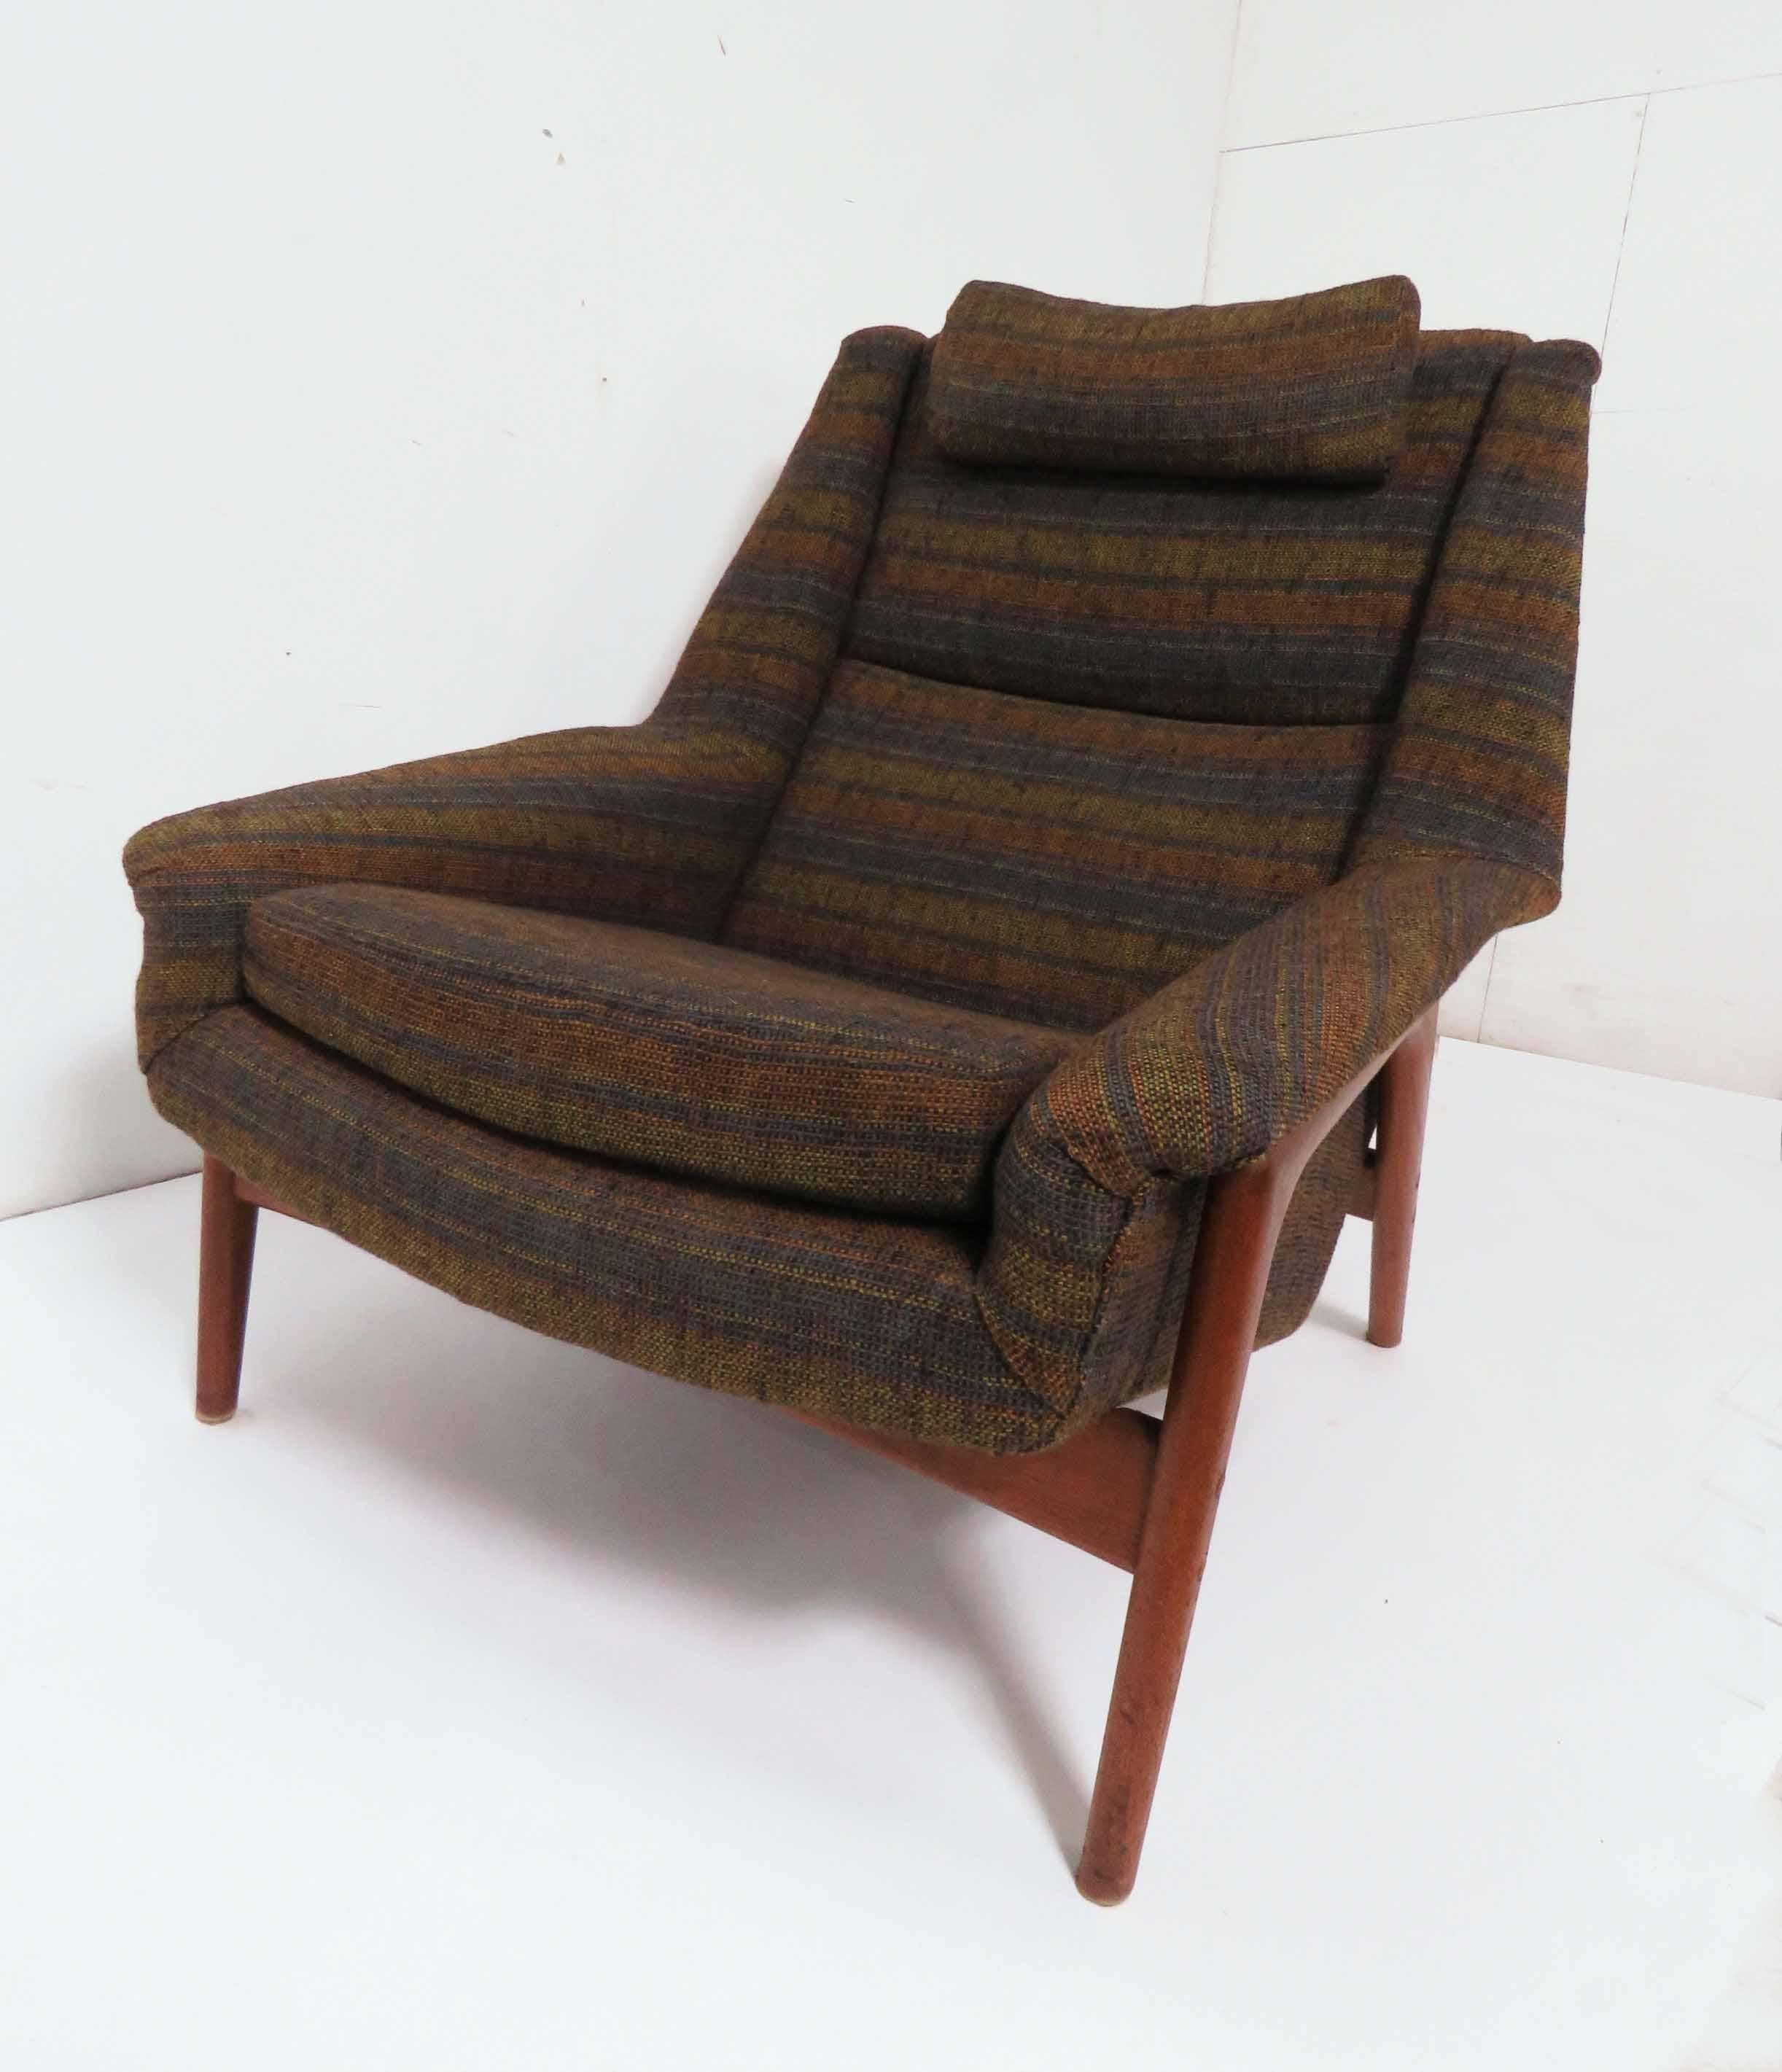 Swedish Folke Ohlsson for DUX Lounge Chair with Ottoman, circa 1960s